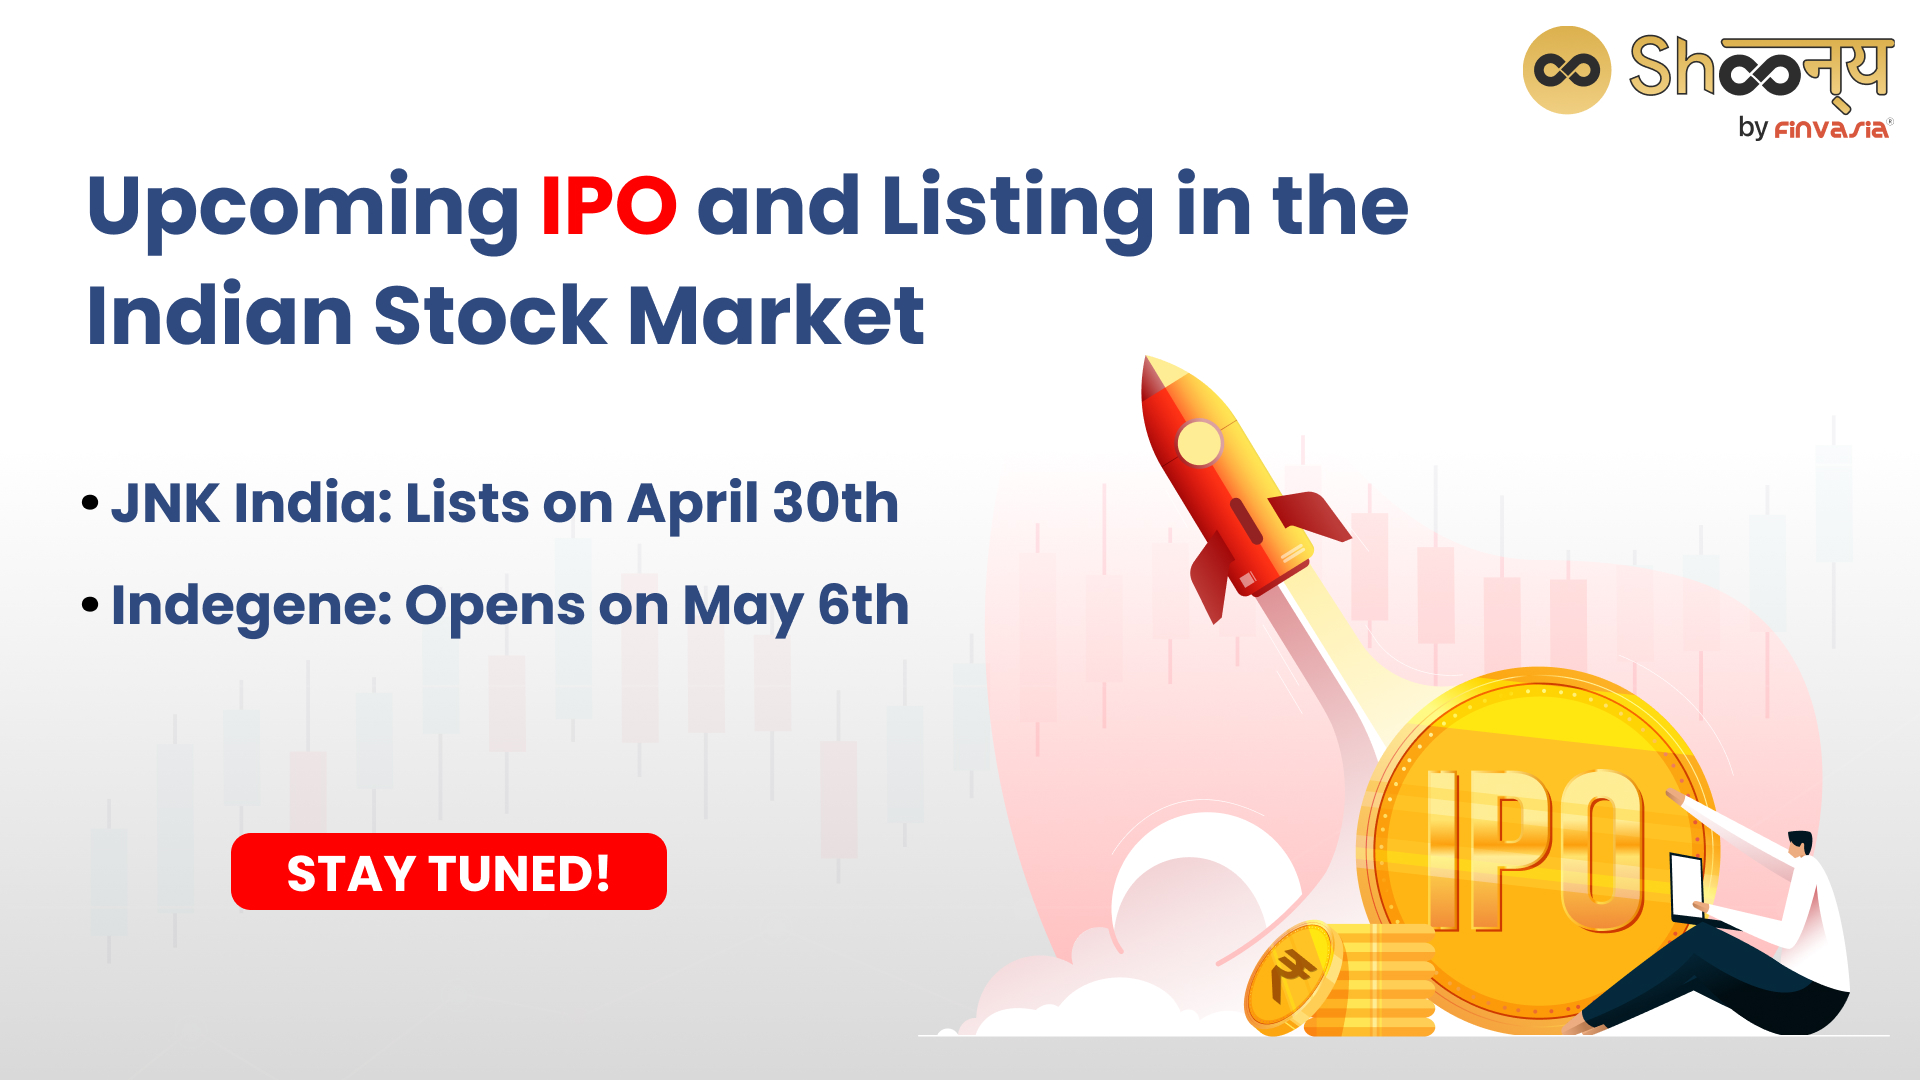 Upcoming IPO Investment Opportunities in the Stock Market